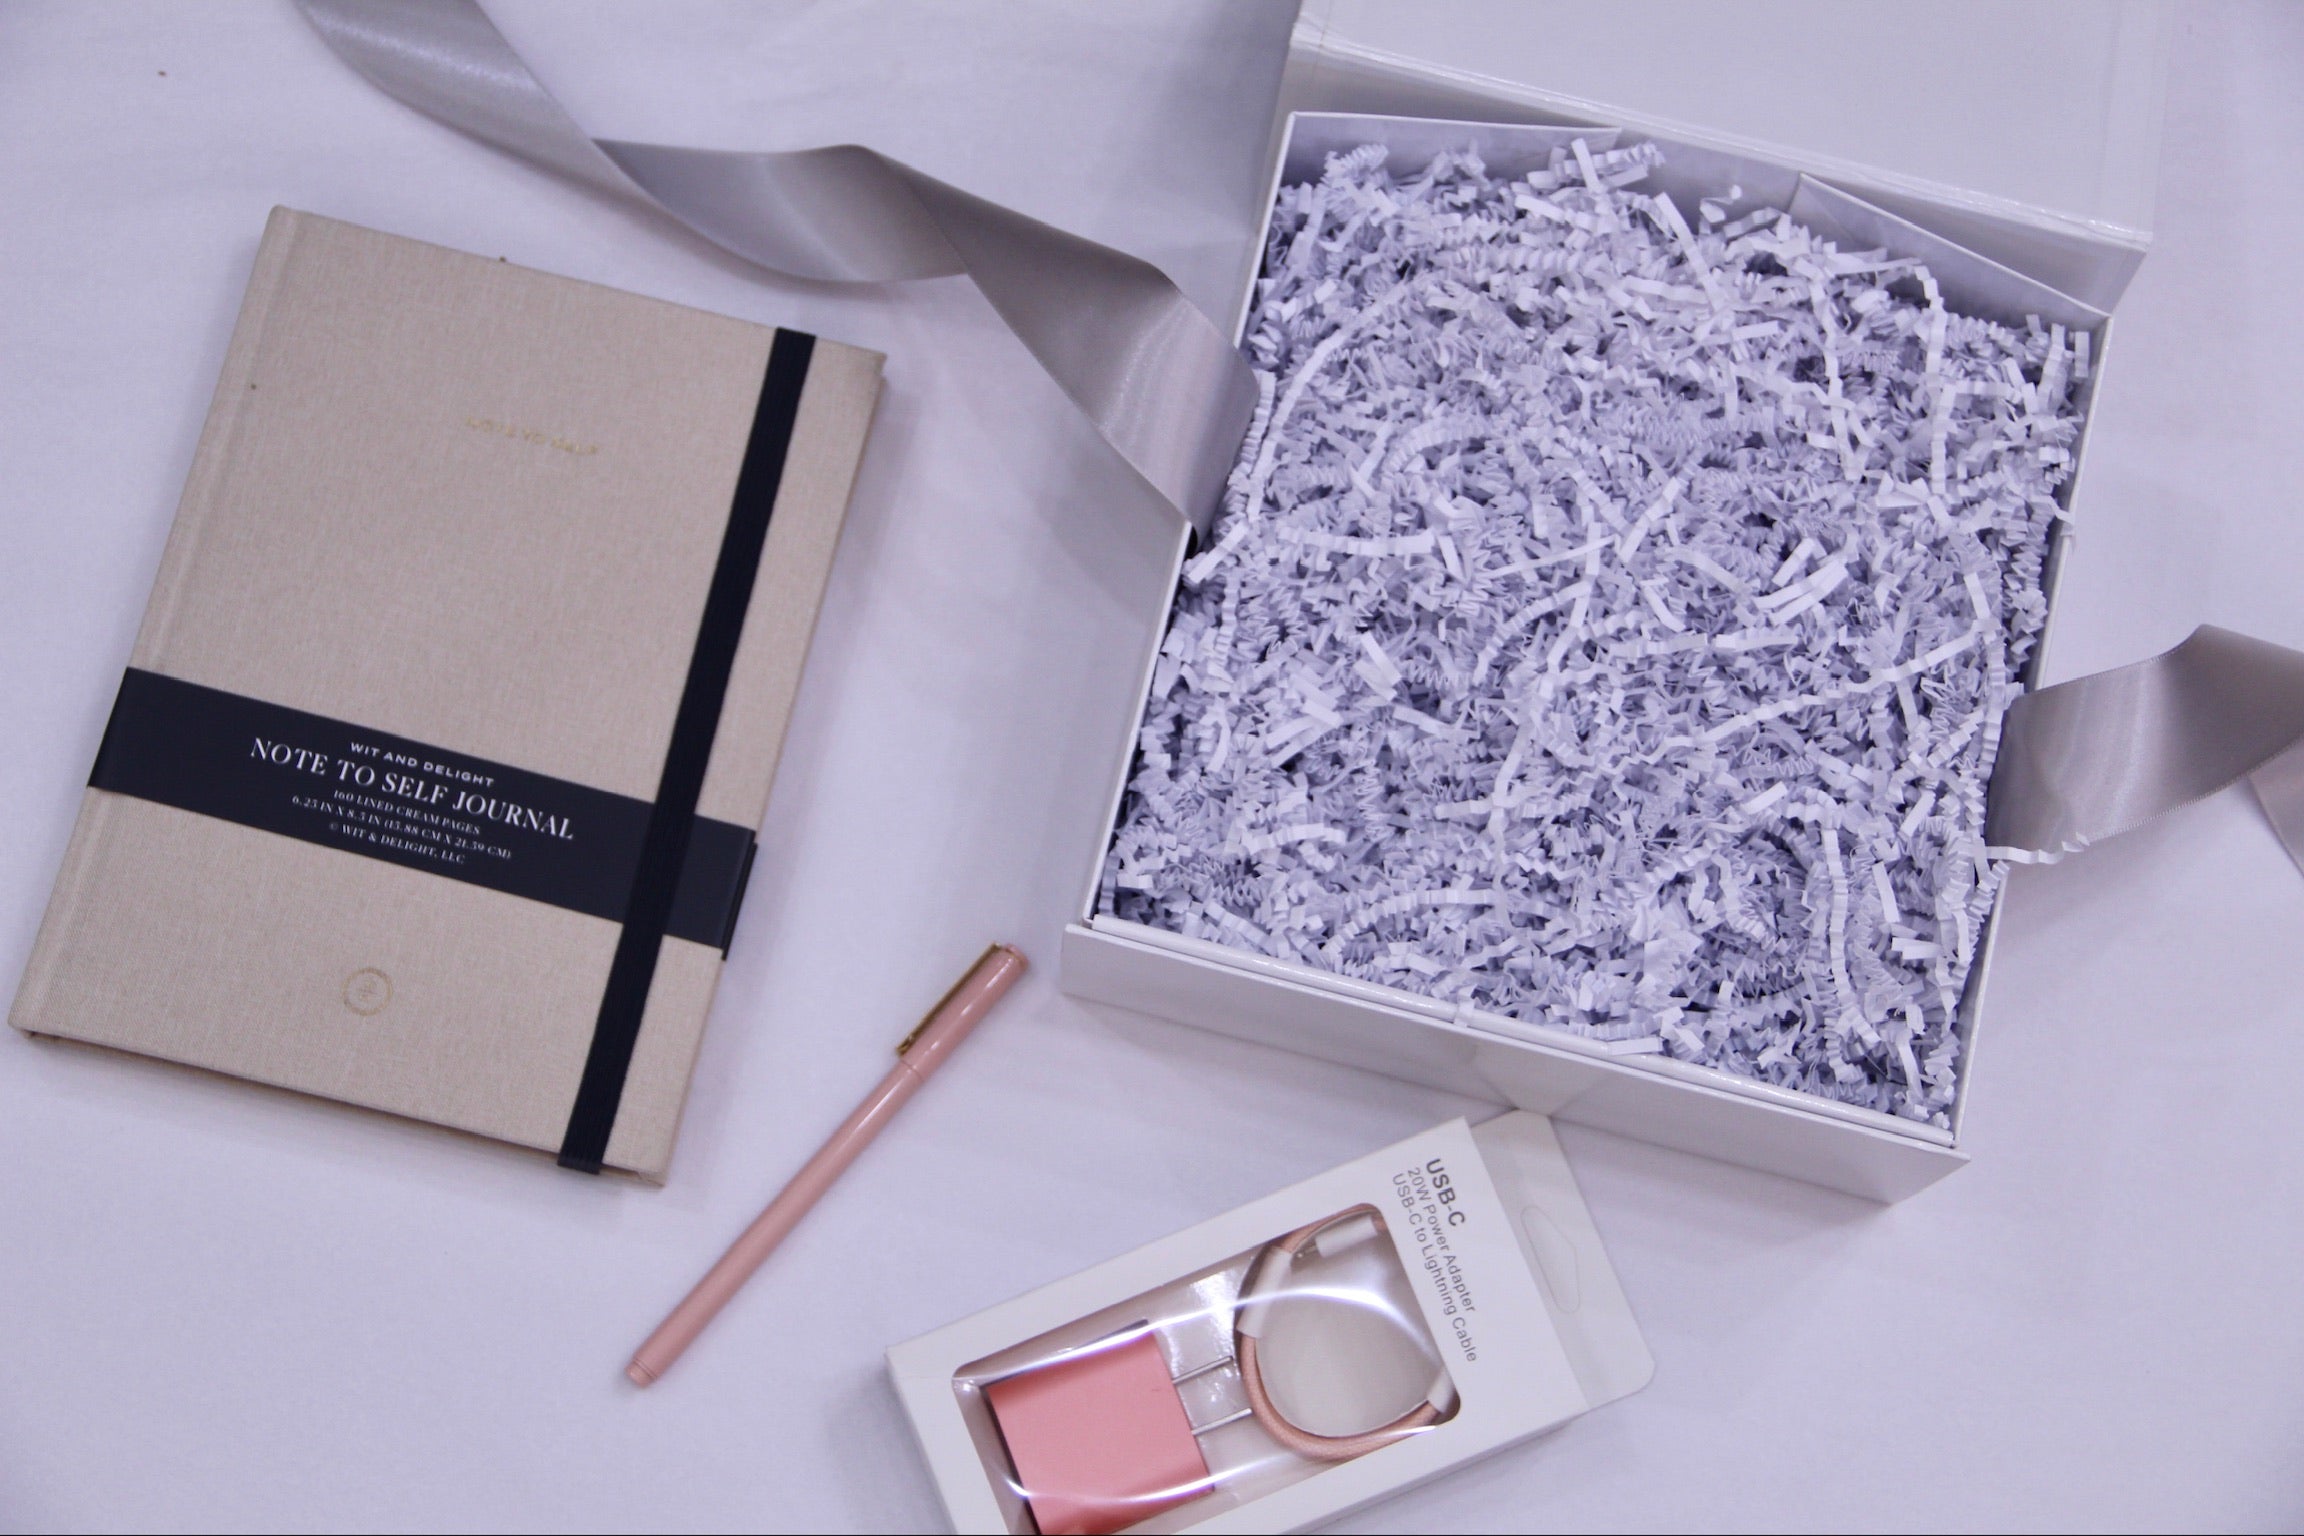 Cream lined journal, rose pen, pink charger in its box, open box filled with crinkle paper